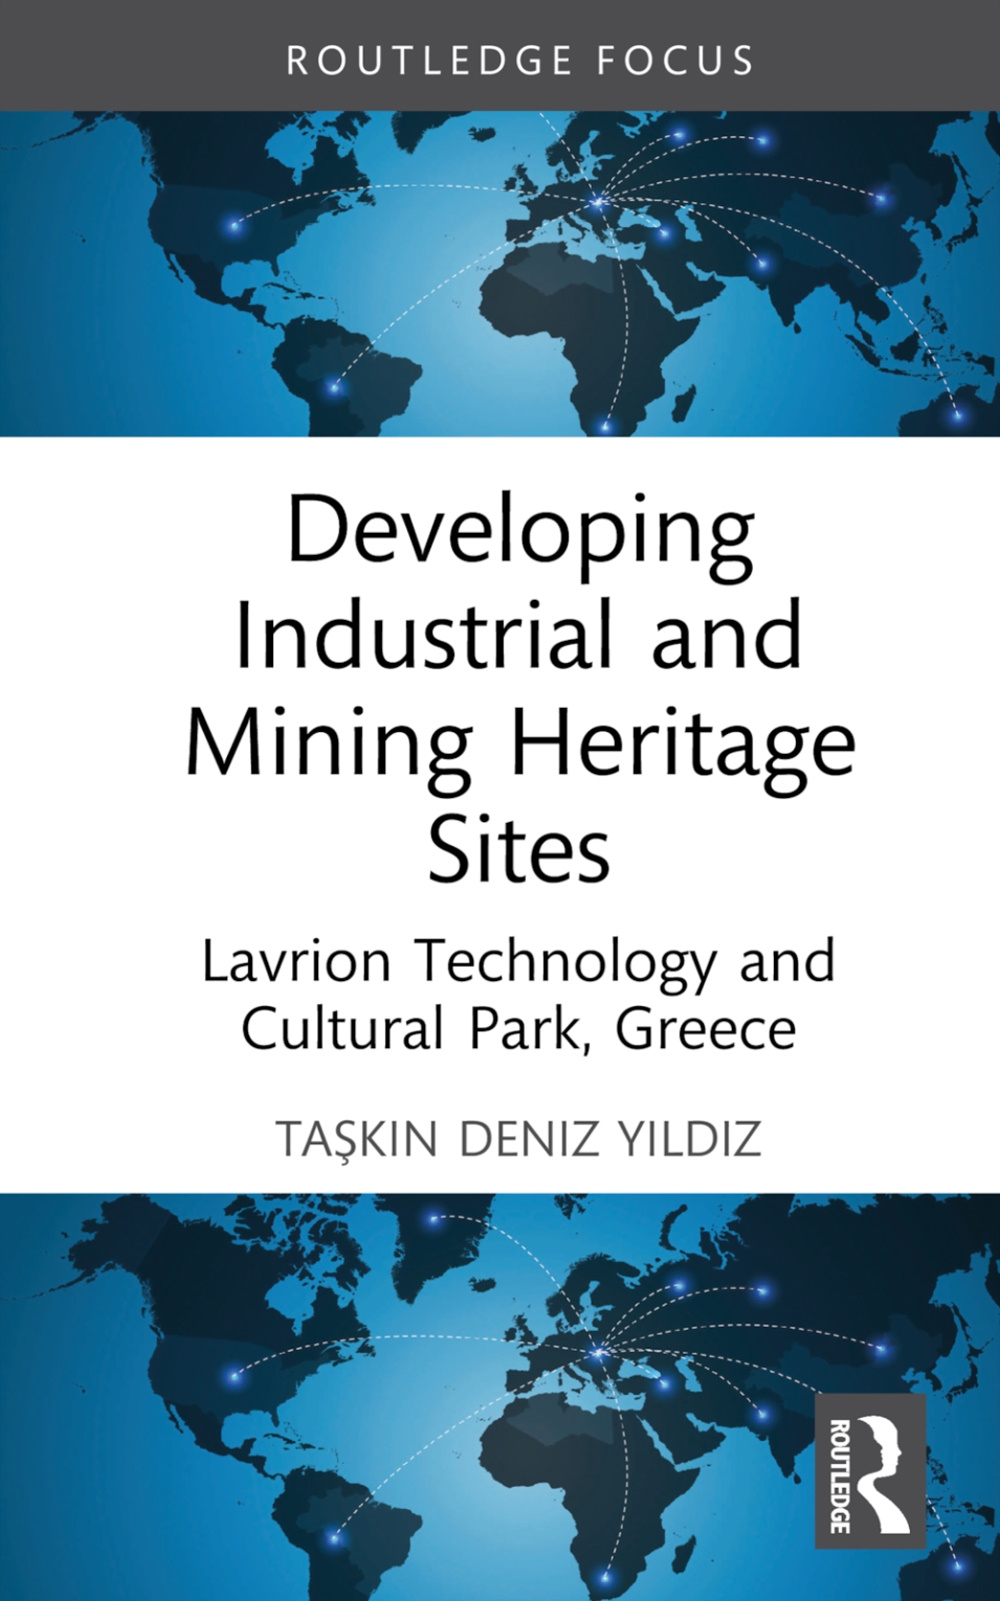 Developing Industrial and Mining Heritage Sites: Lavrion Technology and Cultural Park, Greece